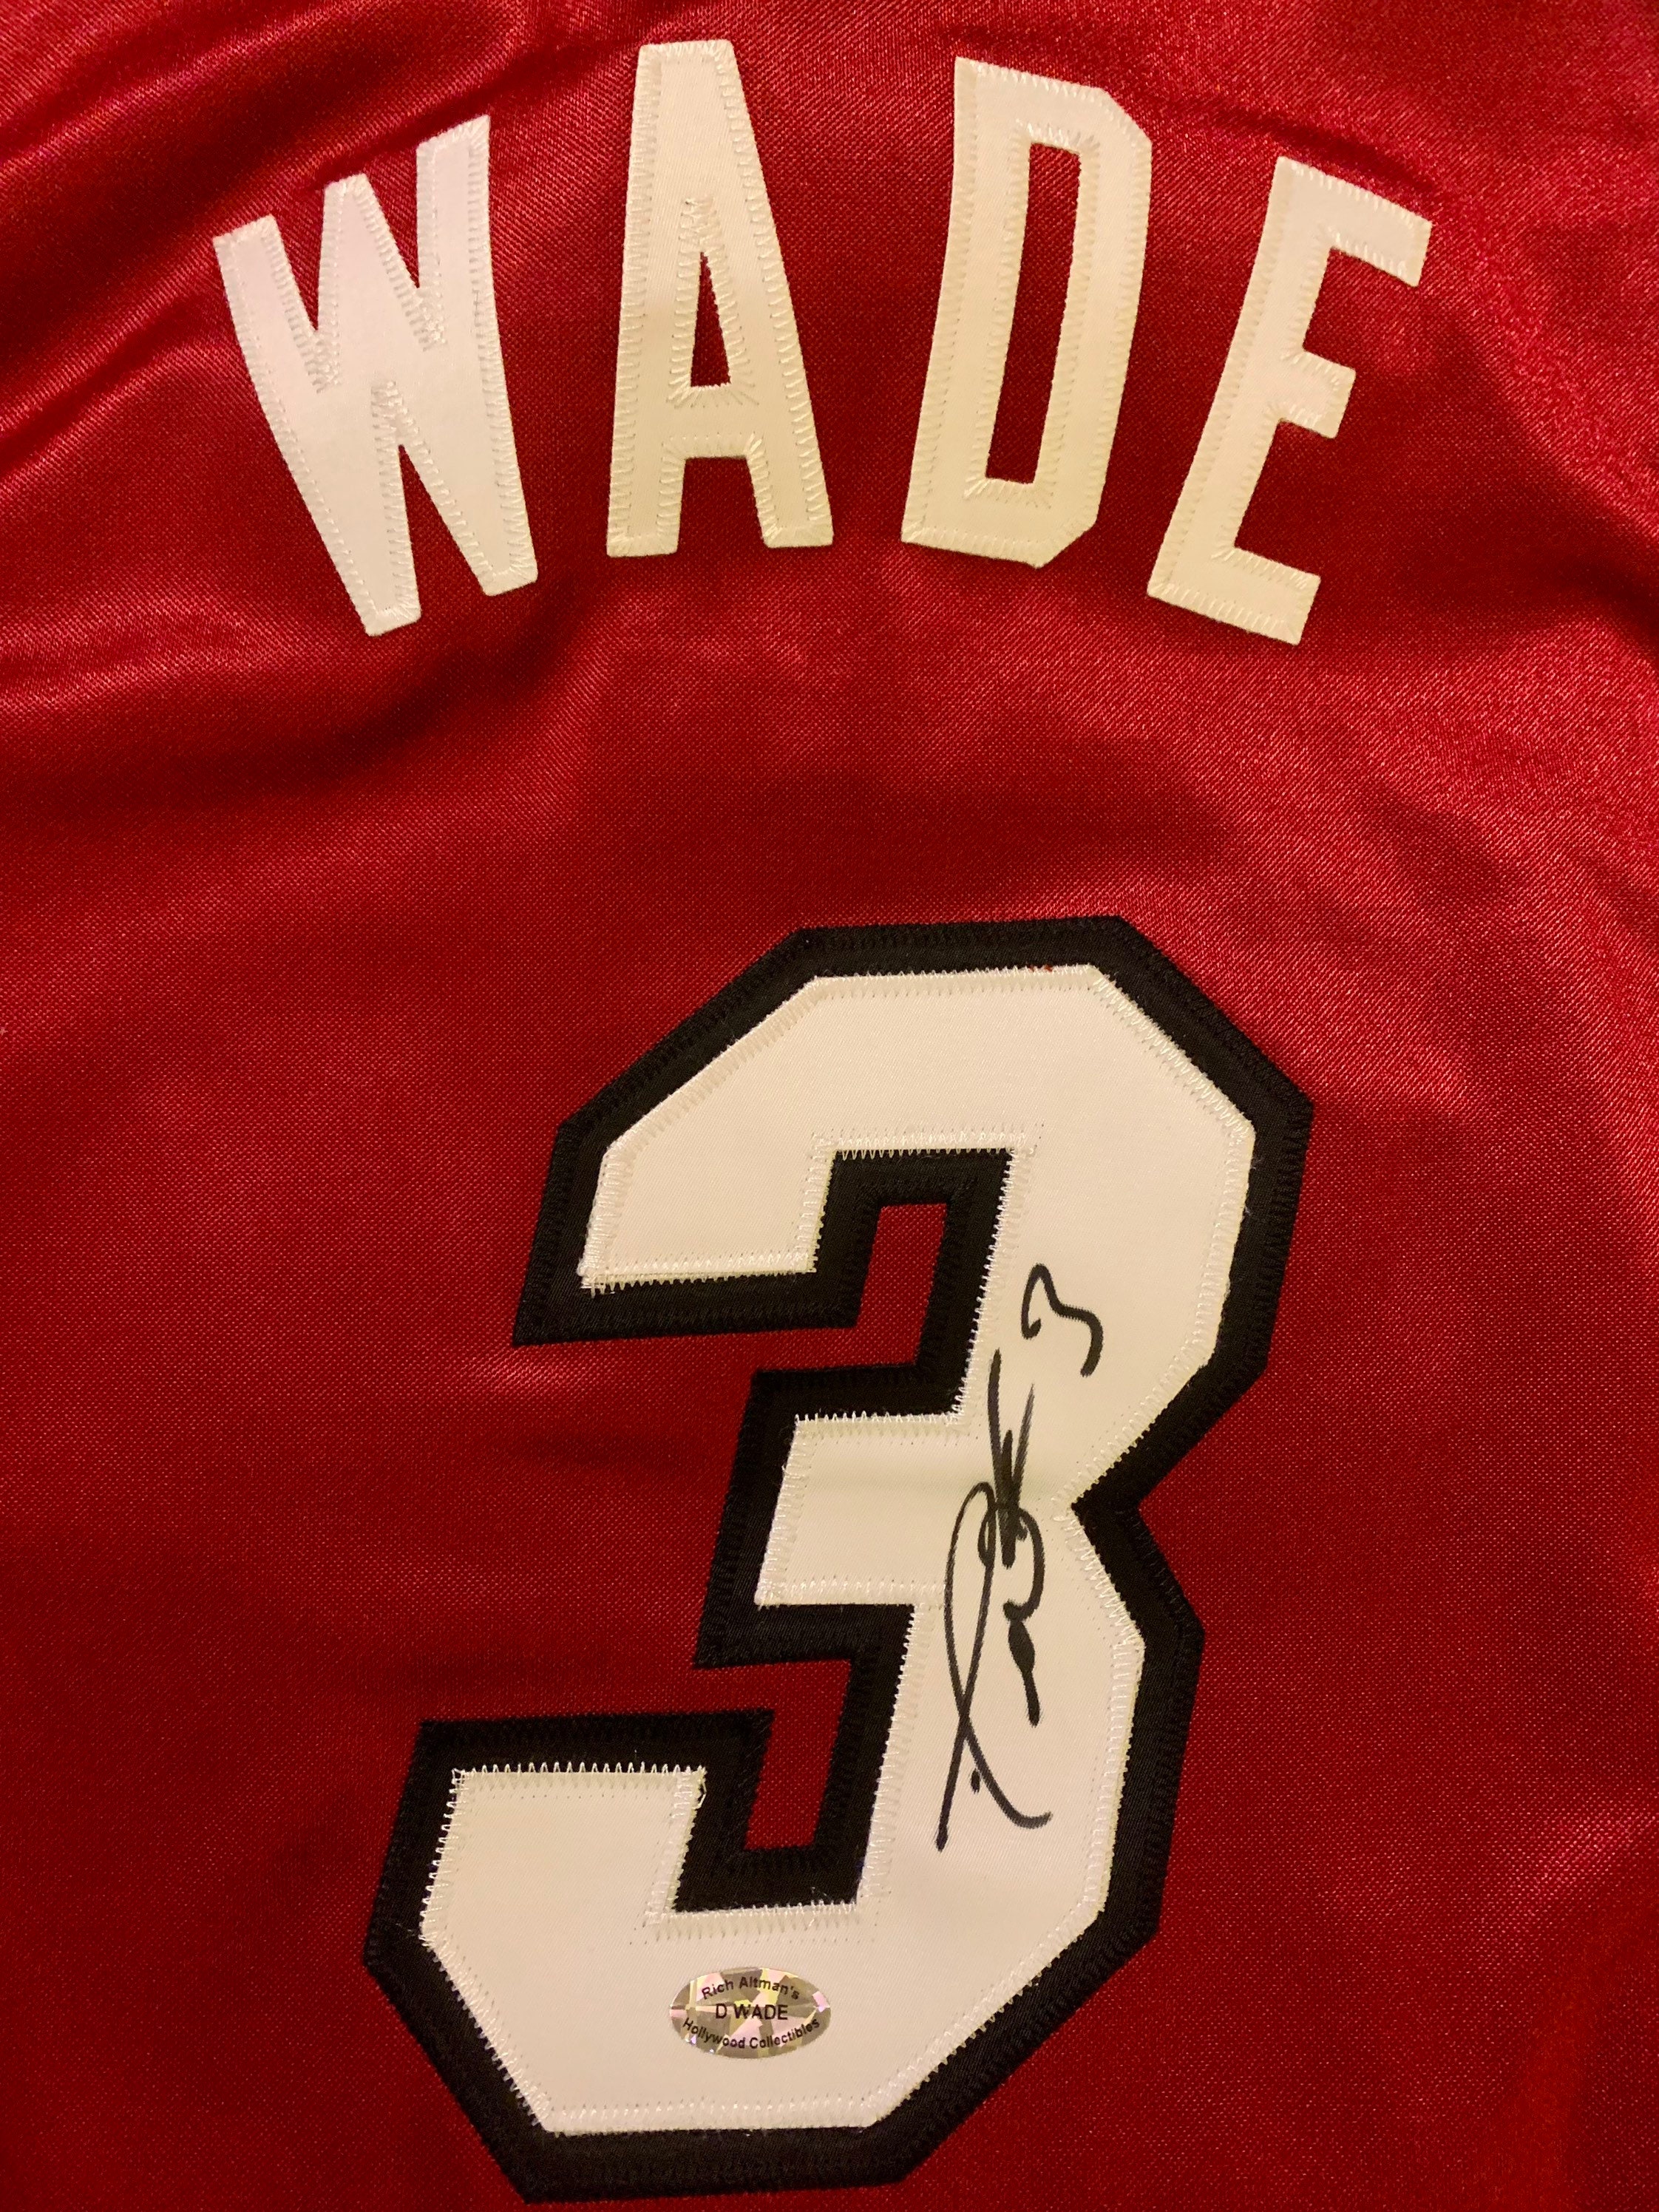 Dwyane Wade Autographed and Framed Miami Heat Jersey